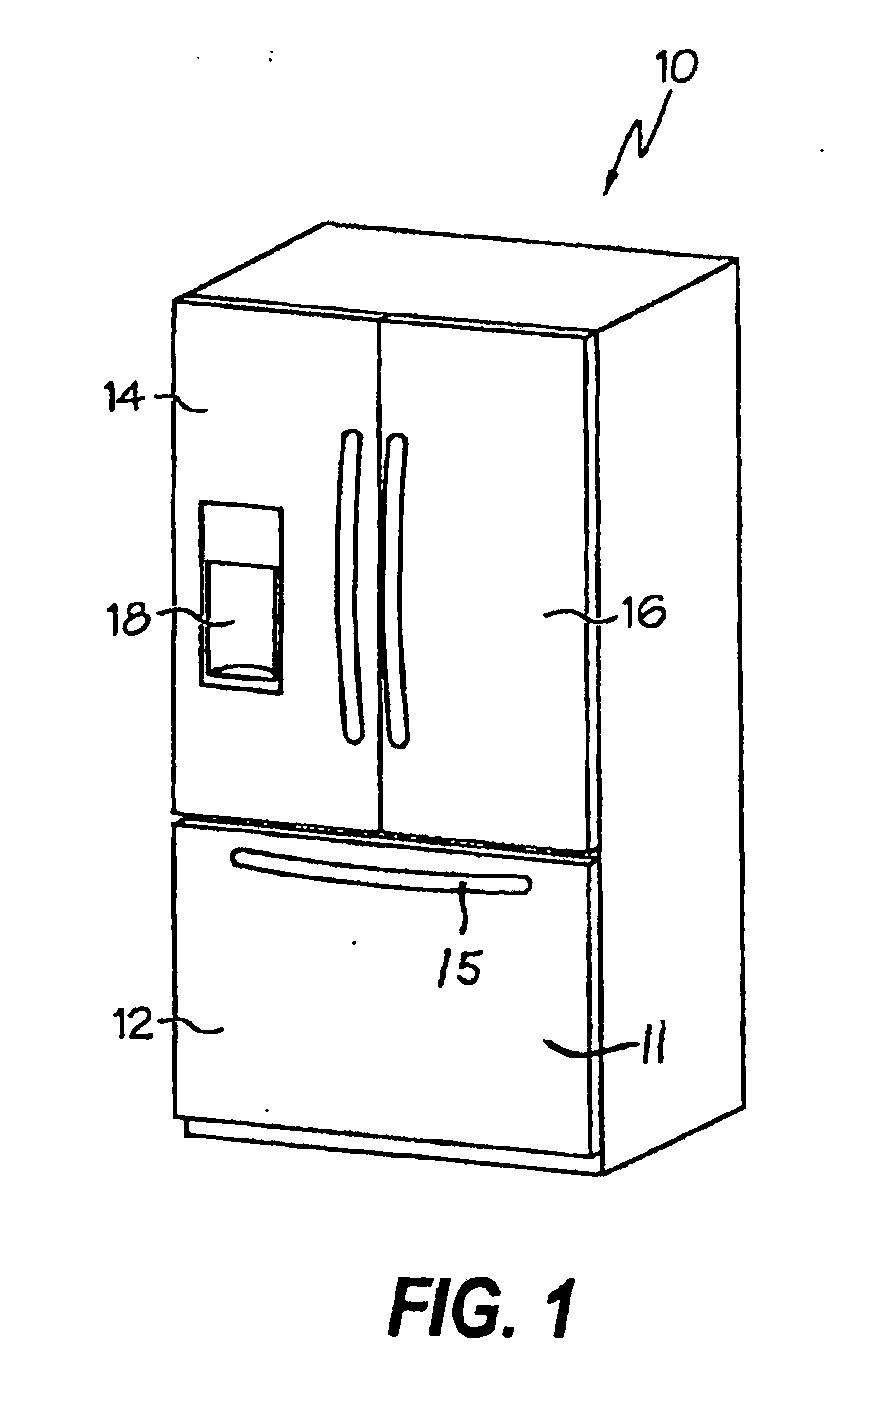 Ice maker for a refrigeration appliance